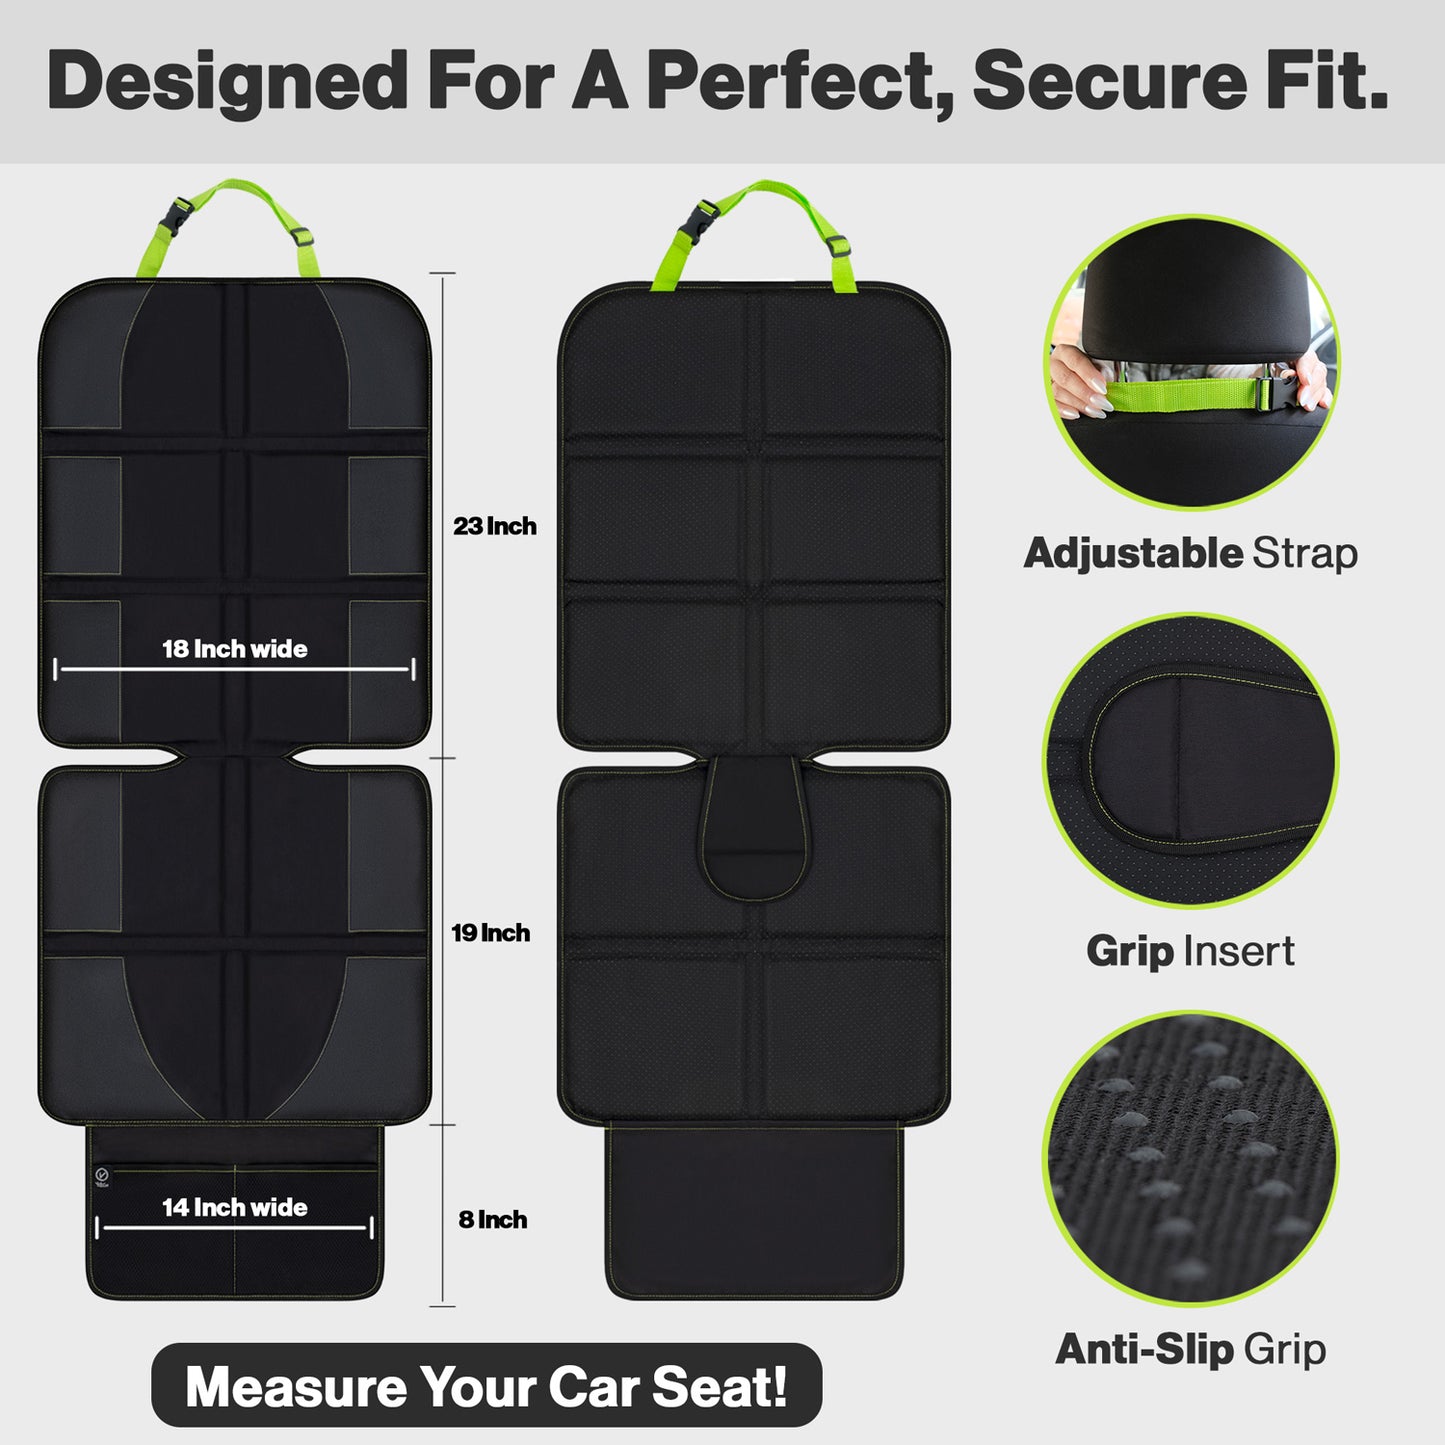 Car Seat Protector for Child Car Seat with Mesh Pockets